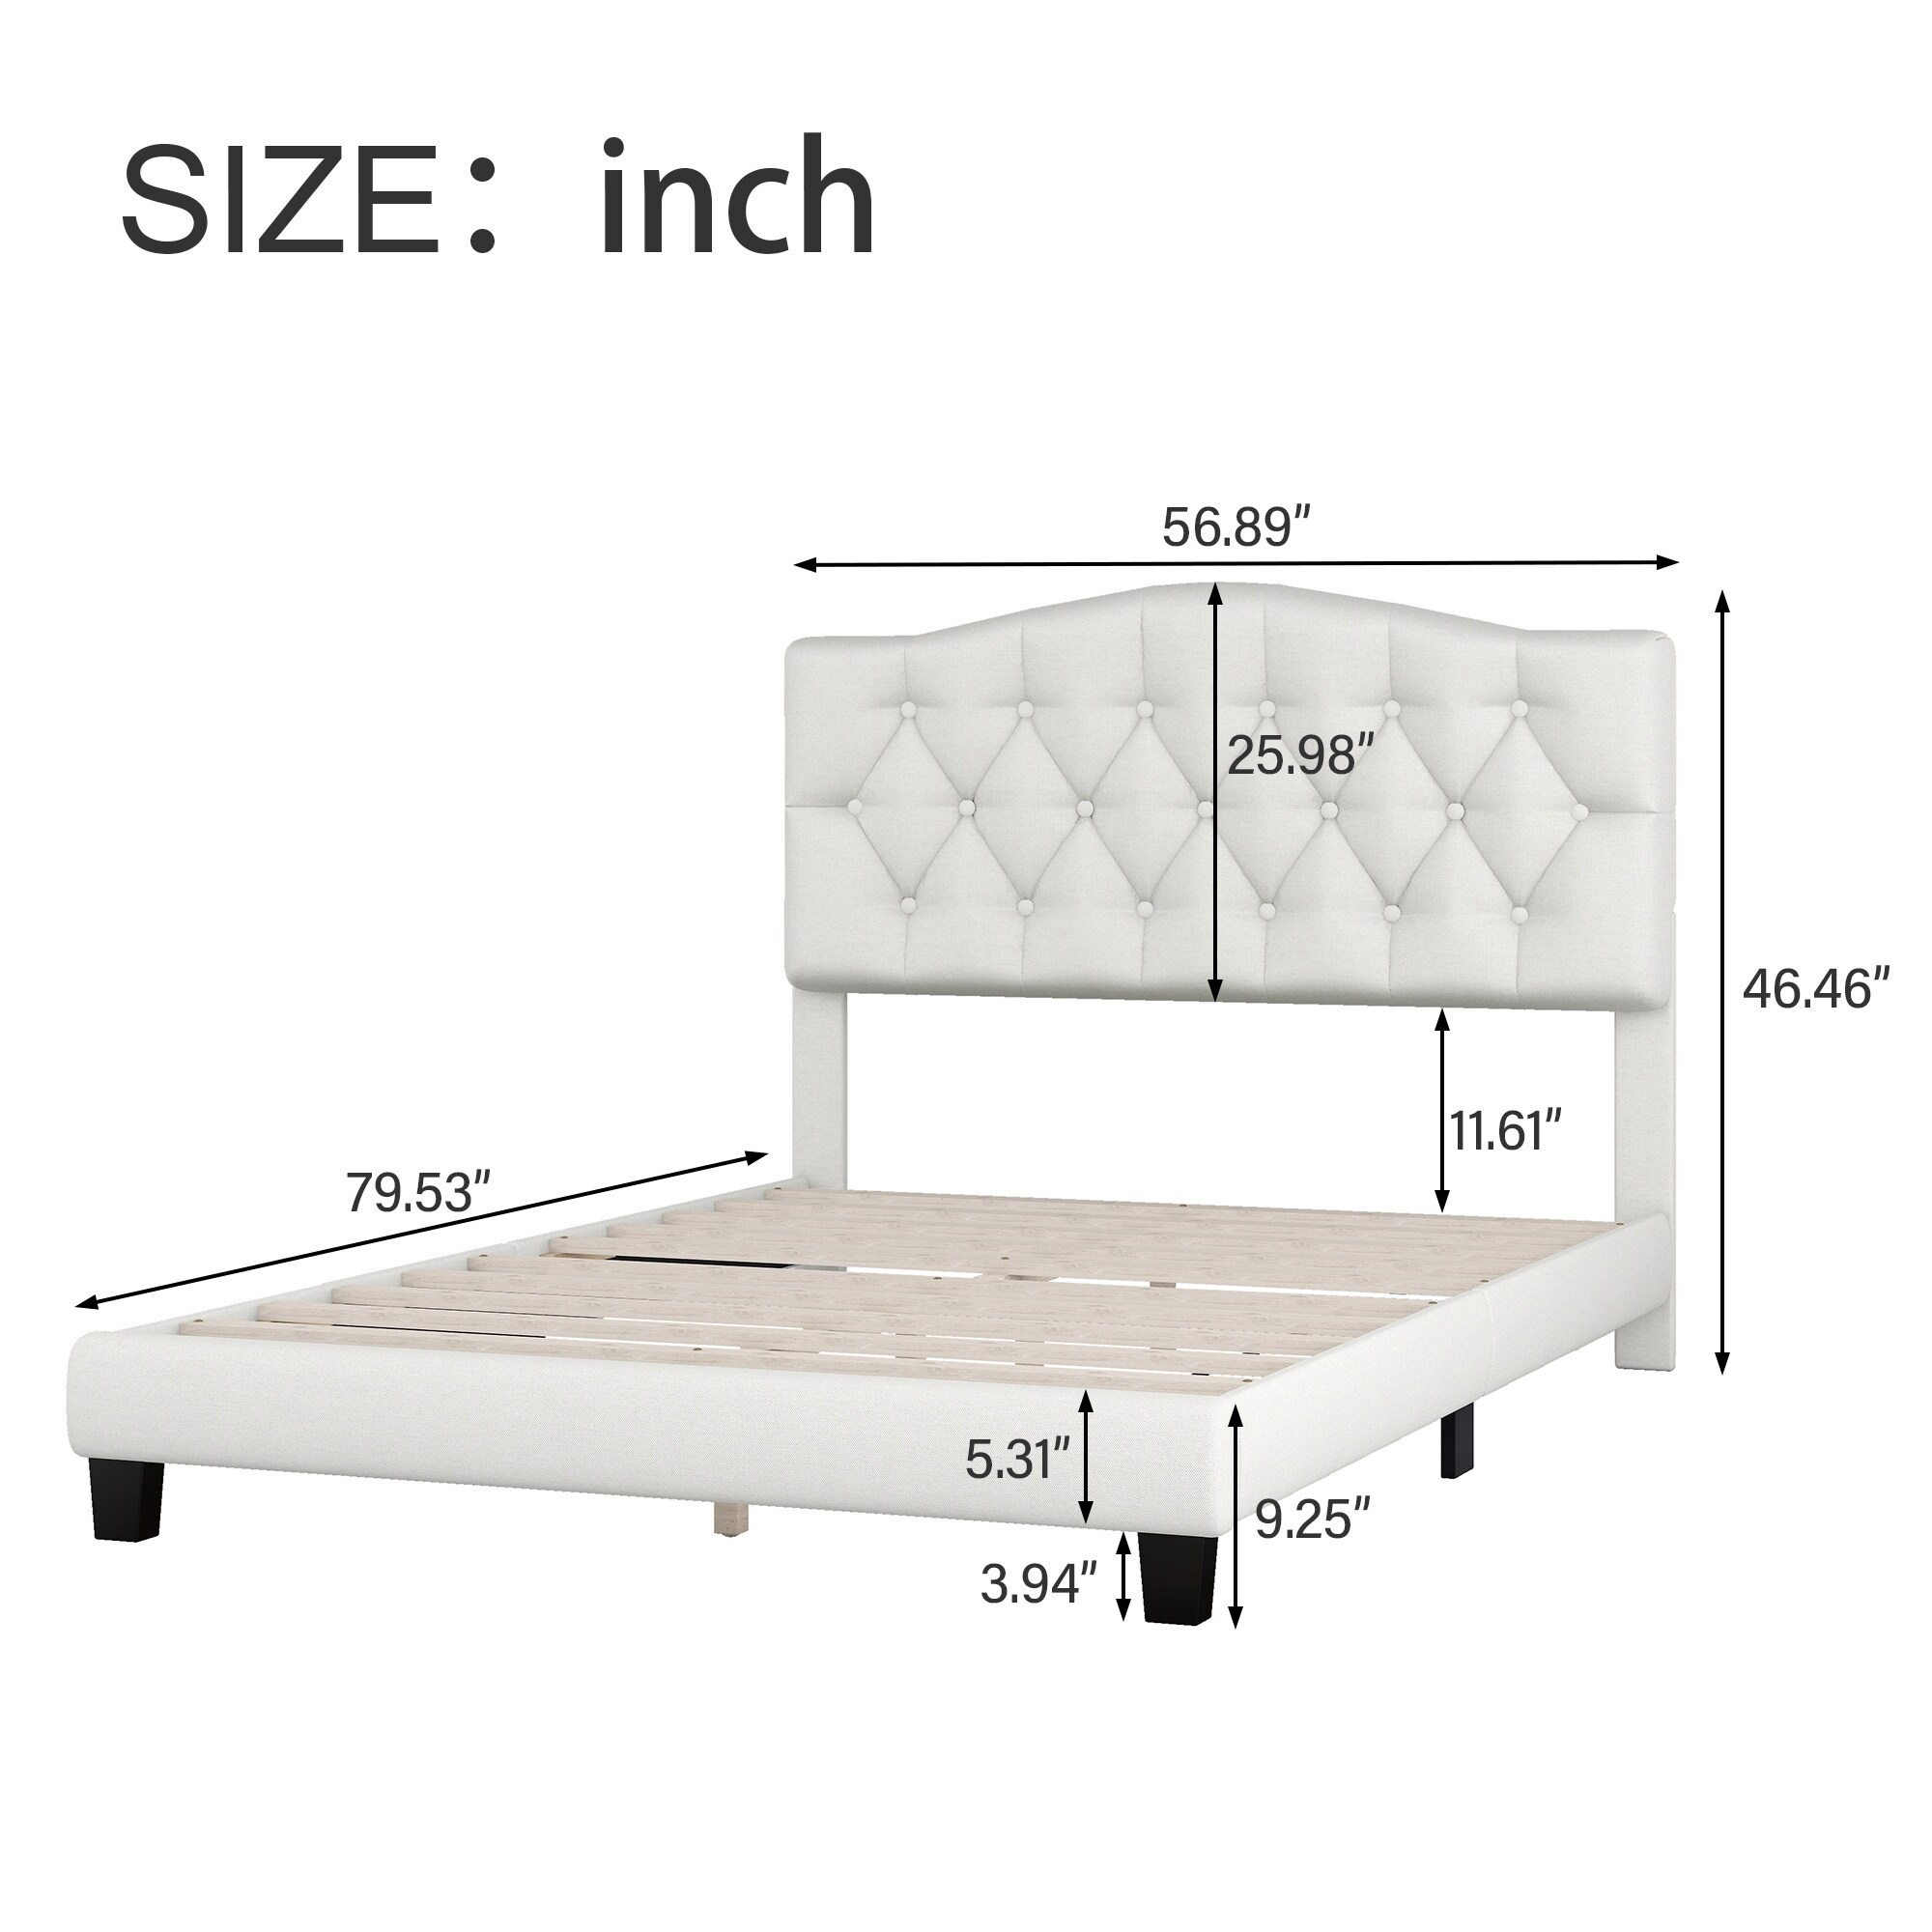 Tufted Linen Platform Bed Frame with Diamond Tufted, Full